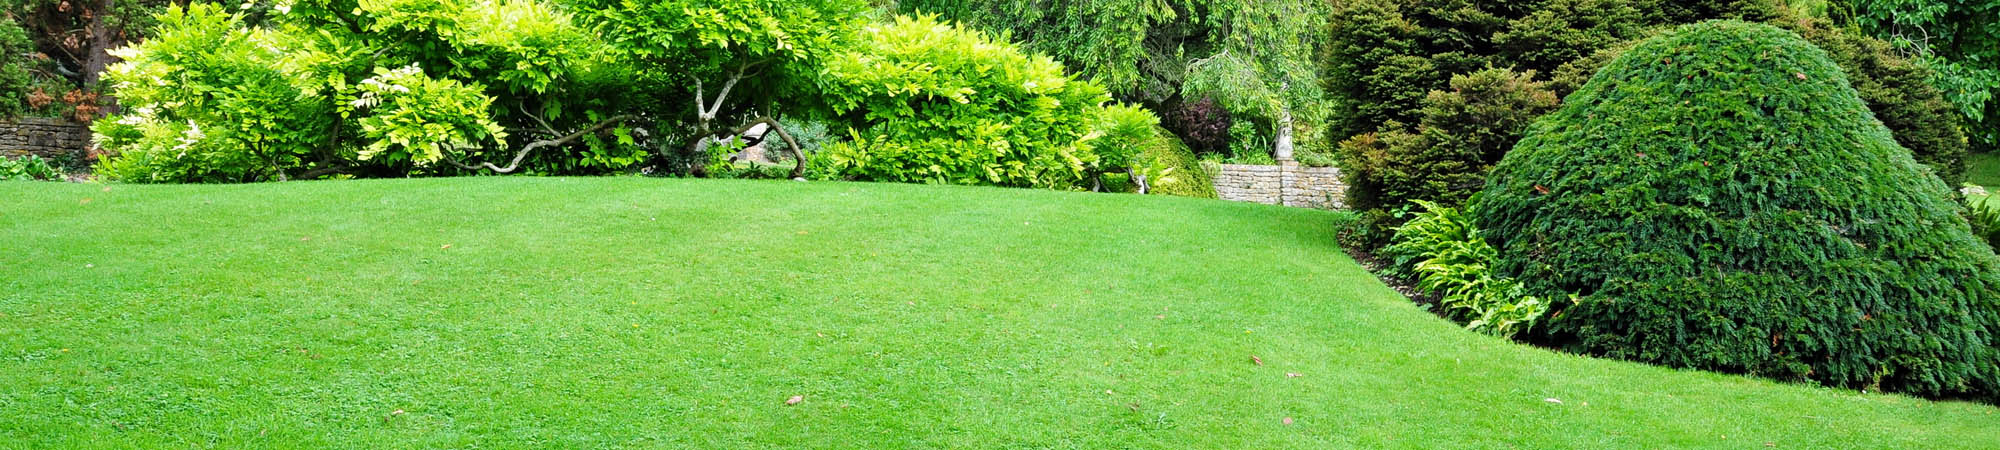 Pest-Free Lawn Maintained By Lawn Insect Control In Edmond, OK